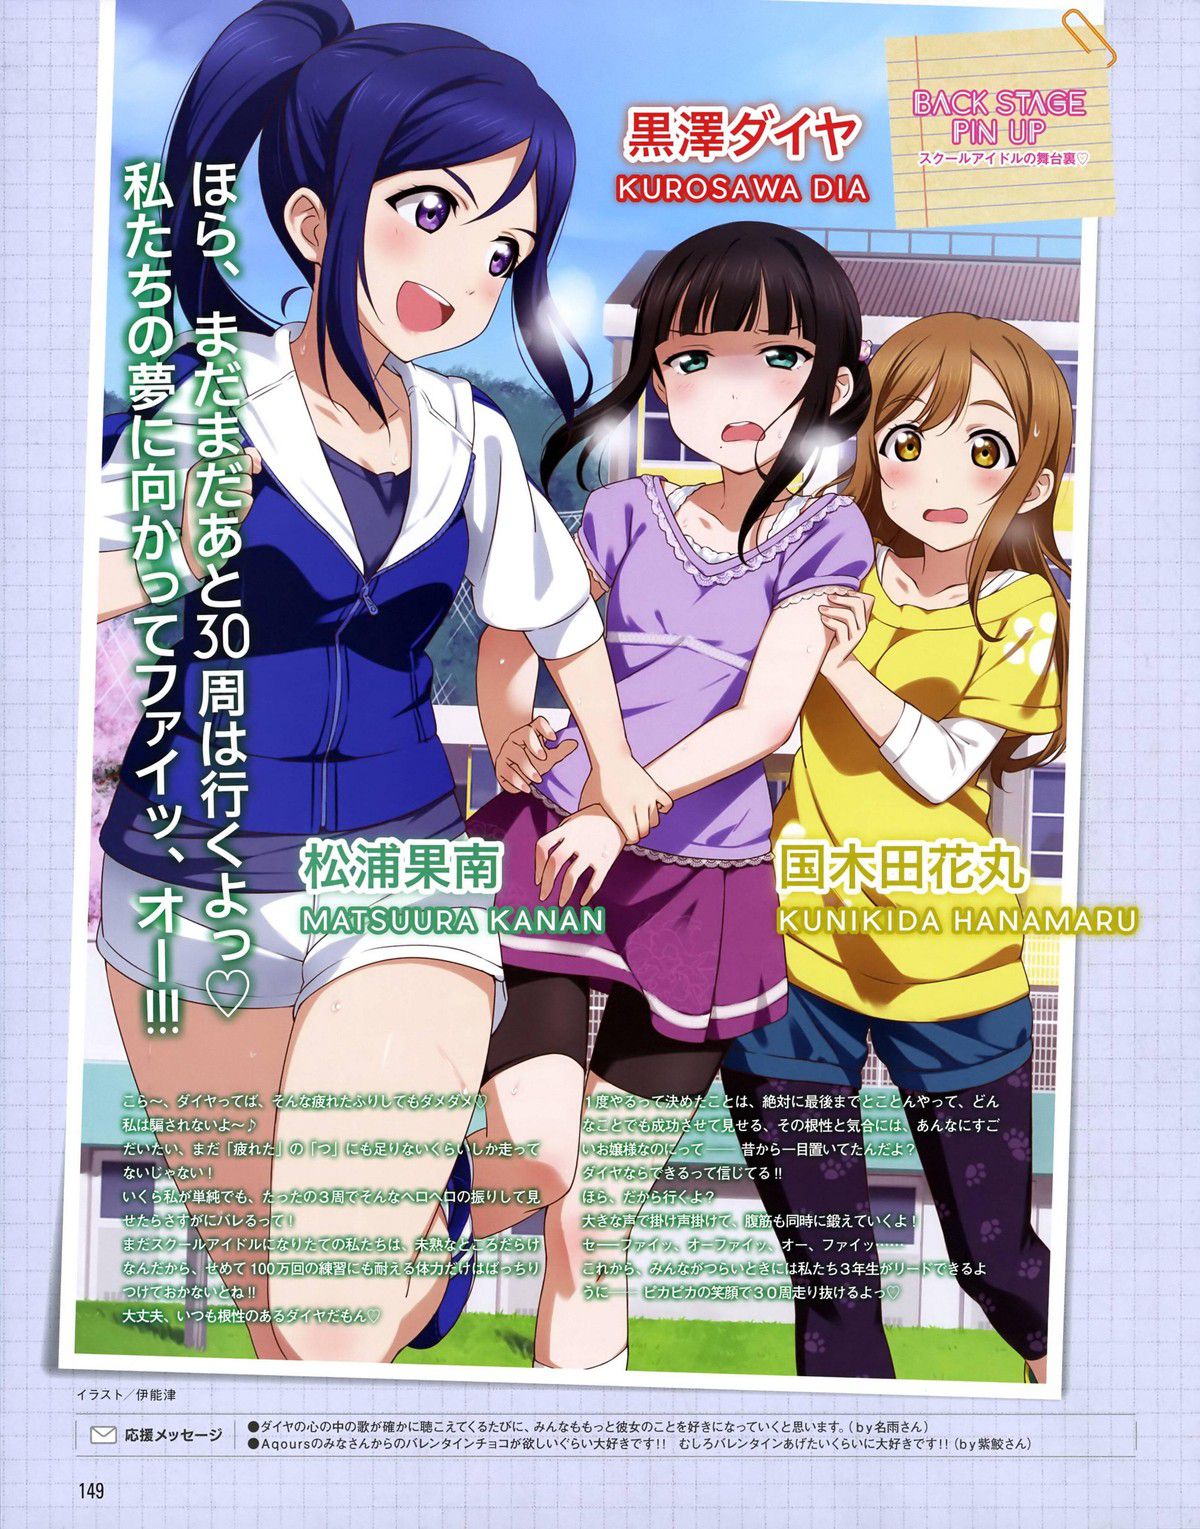 [Image] "love live! Sunshine ' to tell the truth 1-erotic not Matsuura of South's overwhelming body wwwwwwww 25